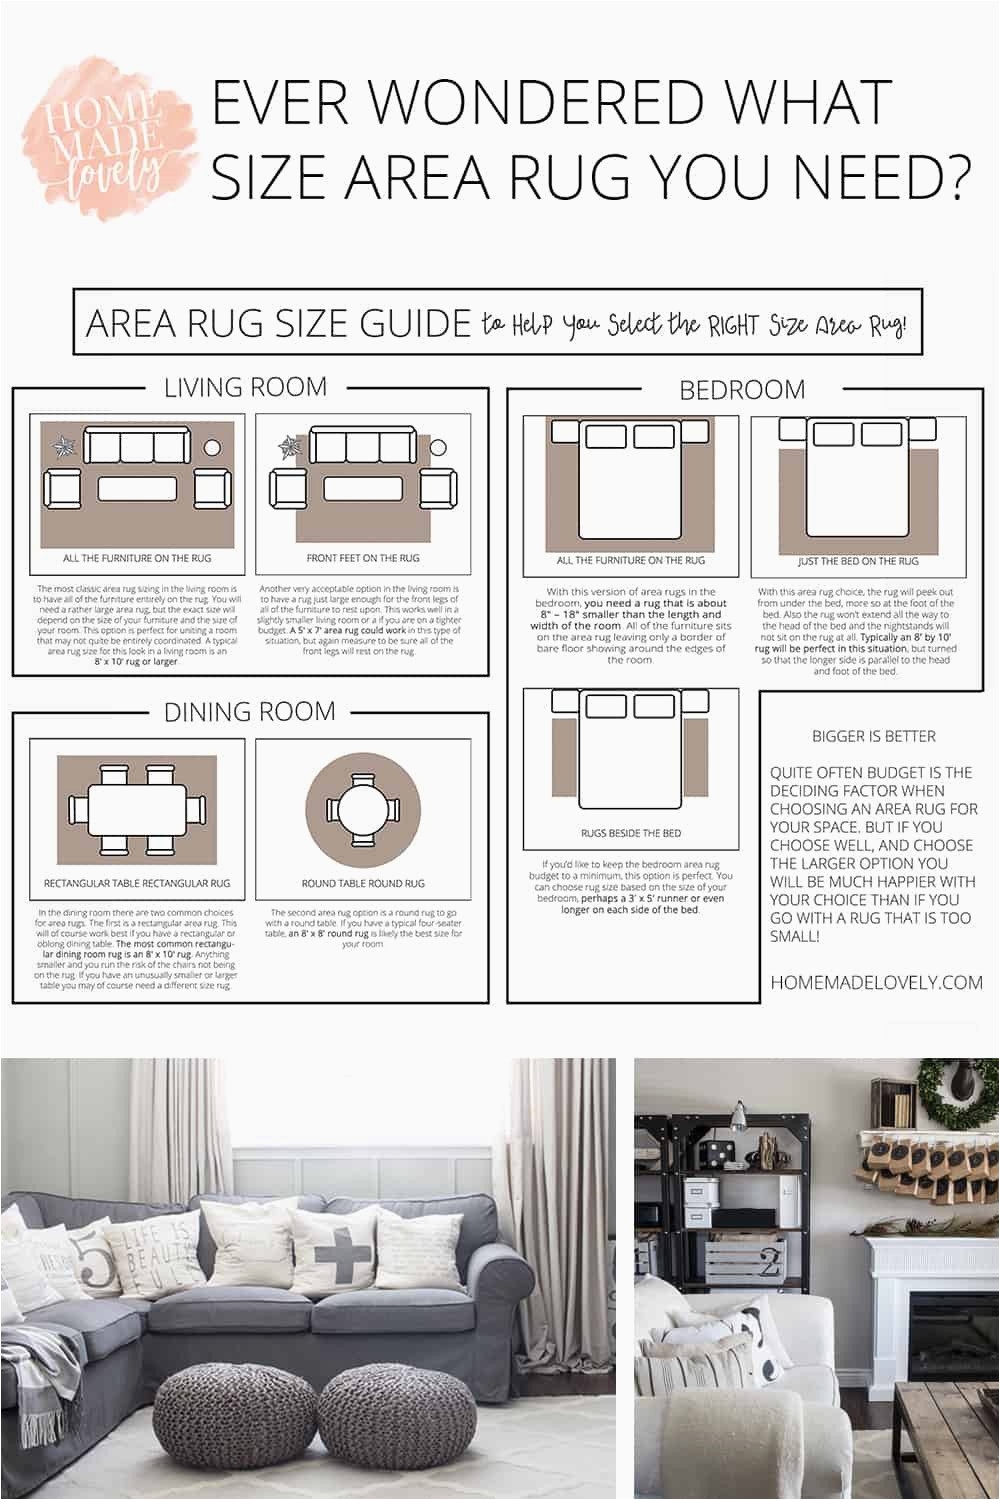 5×7 area Rug Living Room area Rug Size Guide to Help You Select the Right Size area Rug